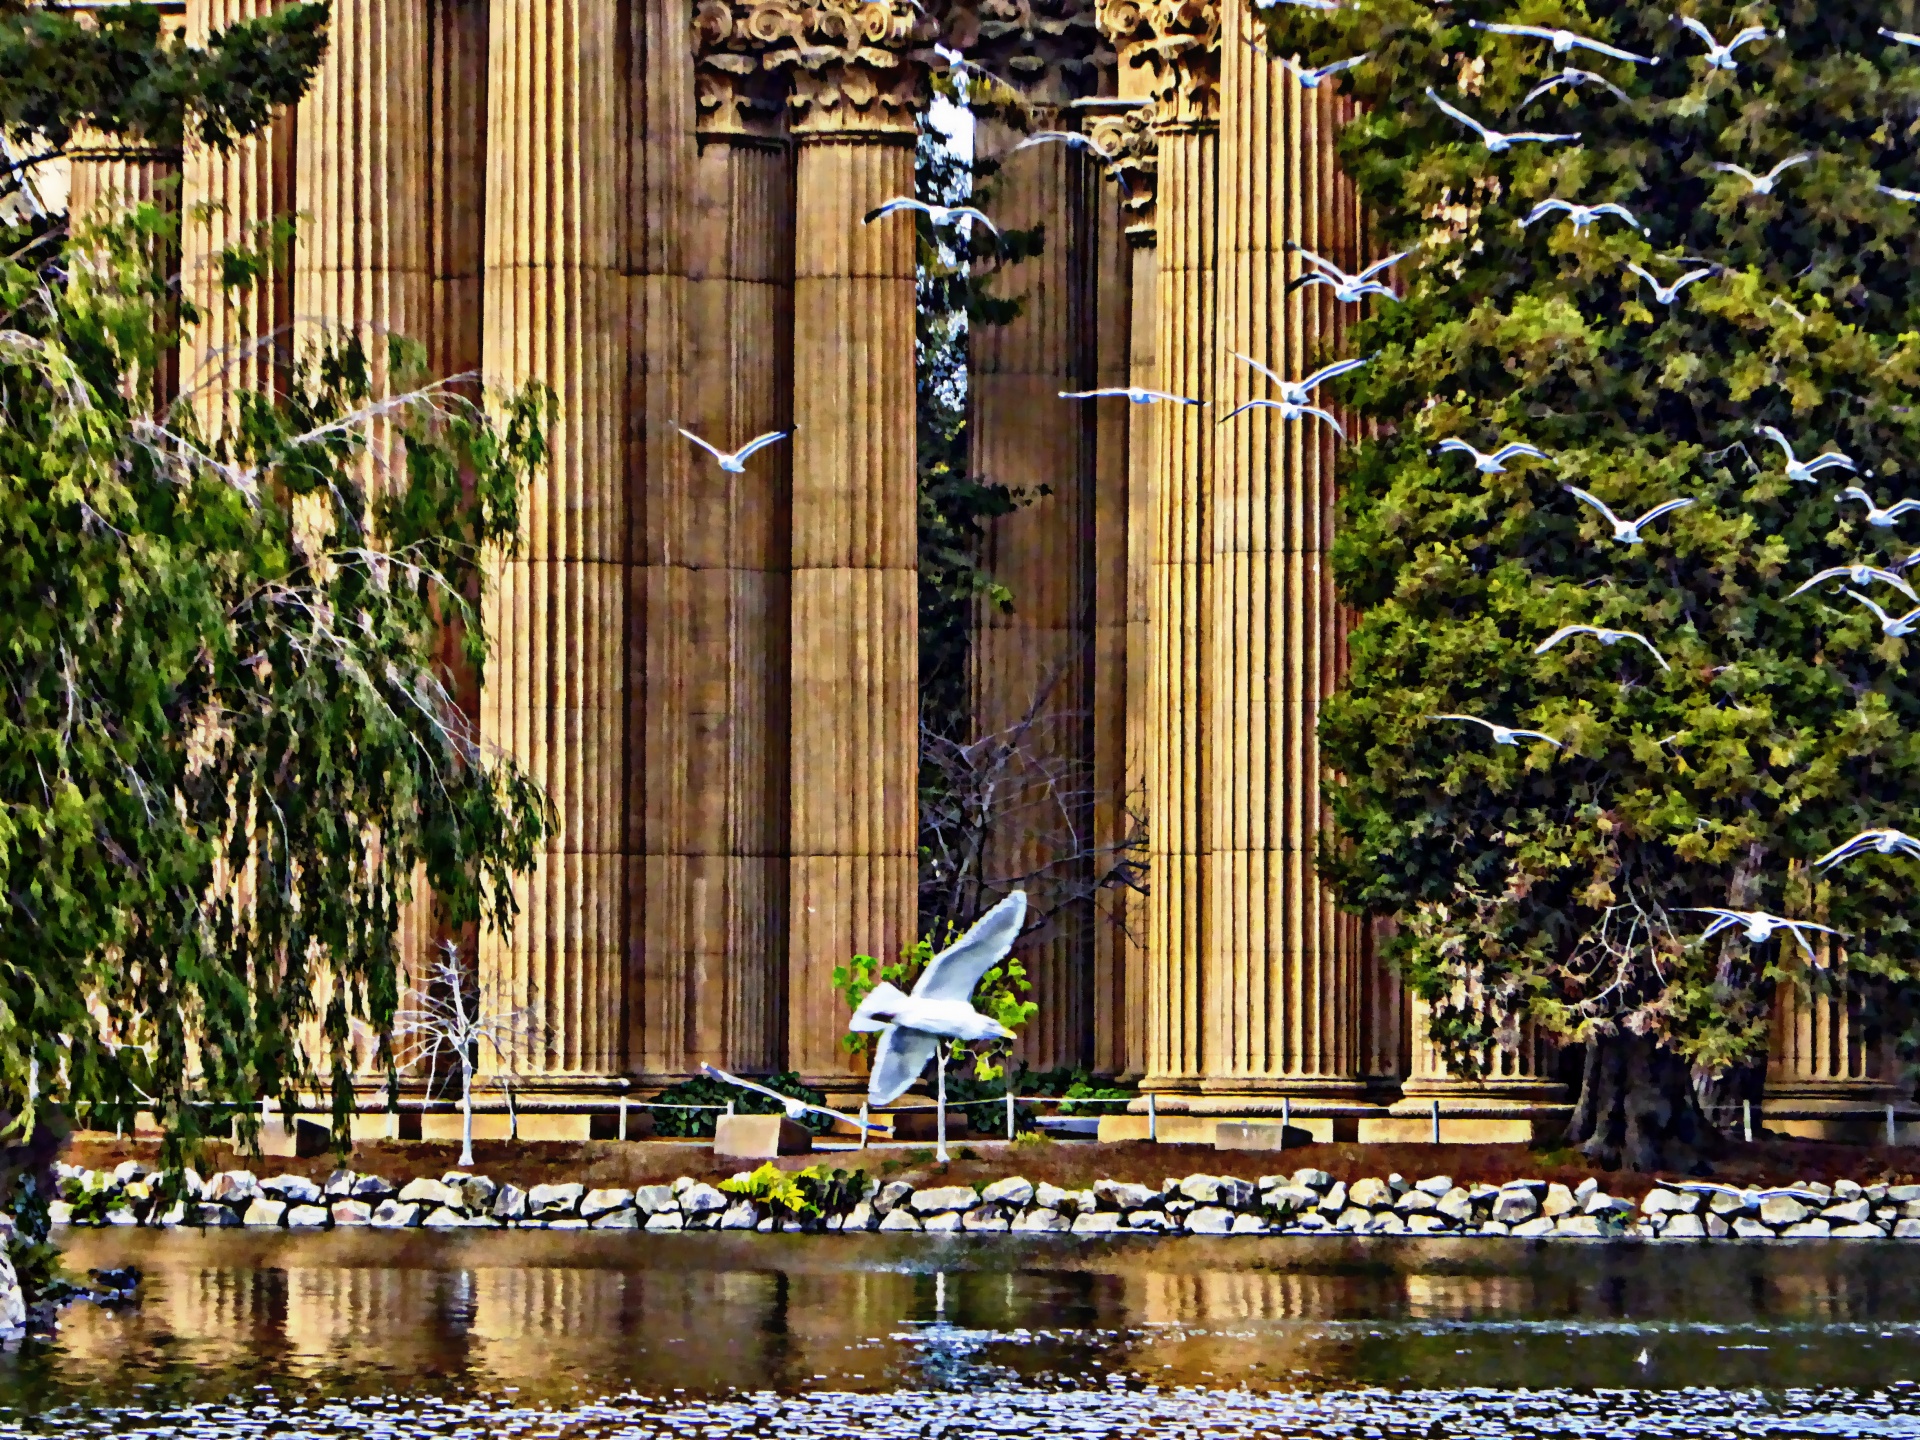 Seagulls And The Palace